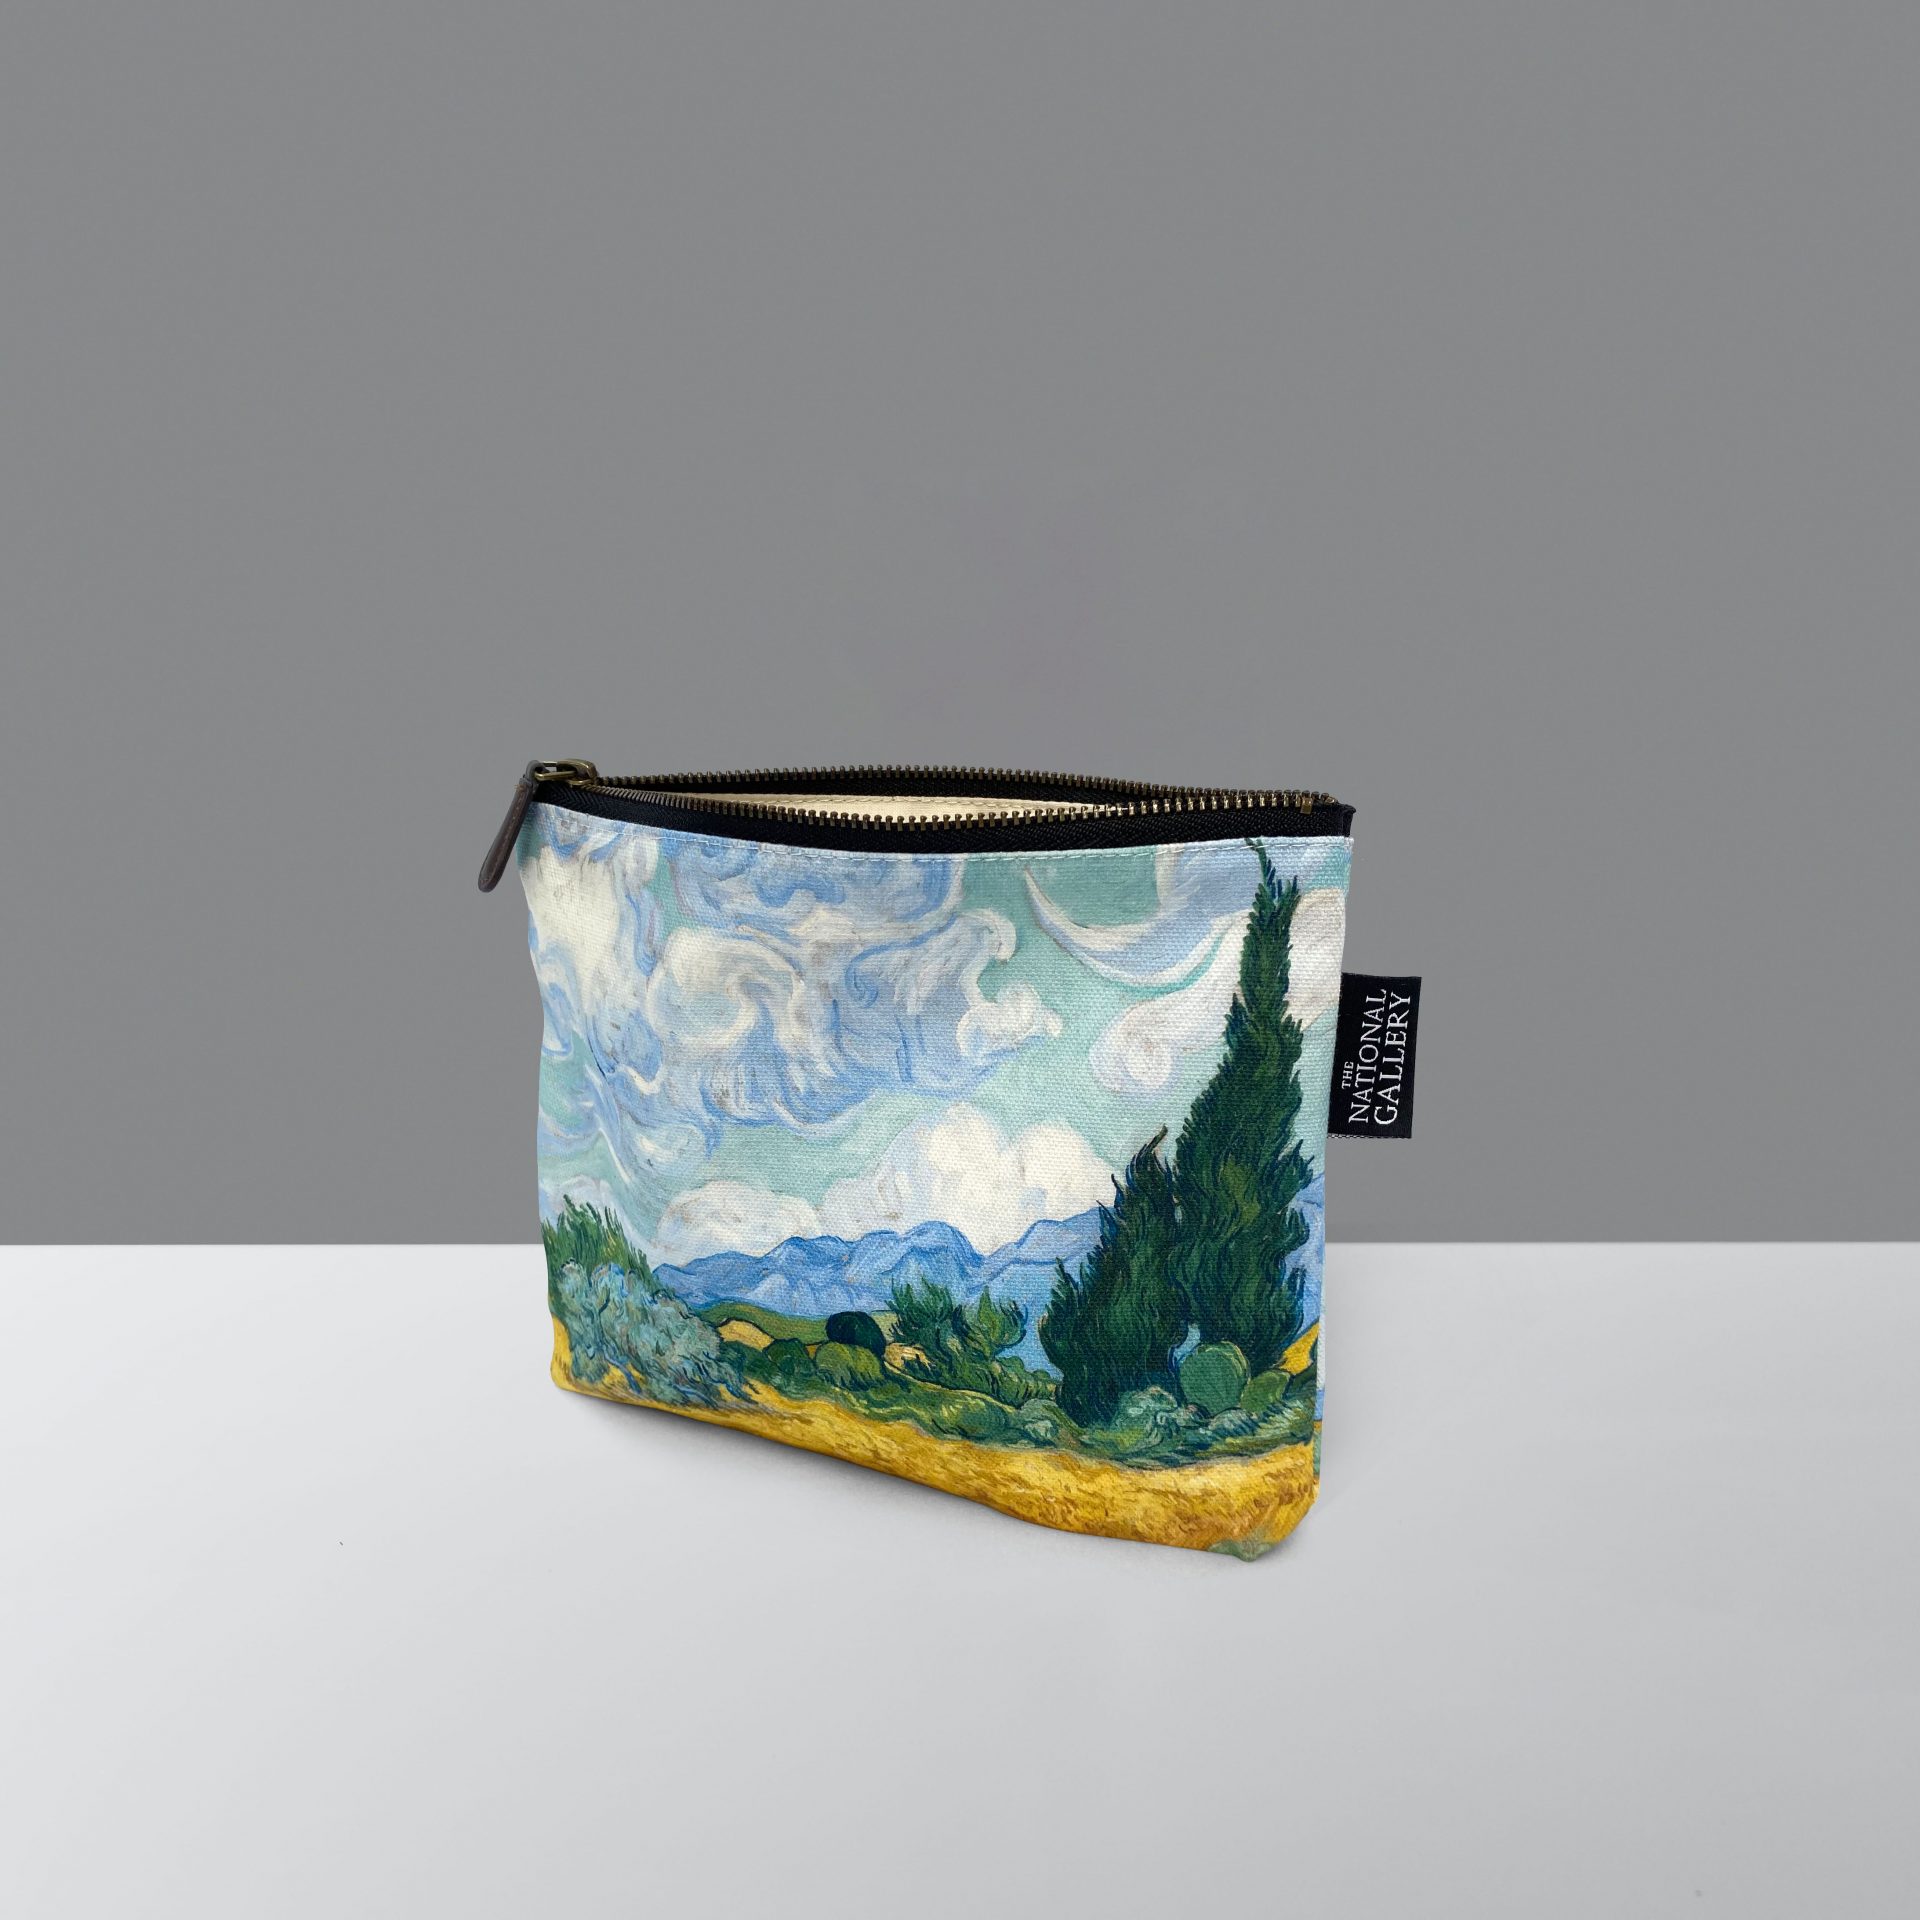 National Gallery promotional purse